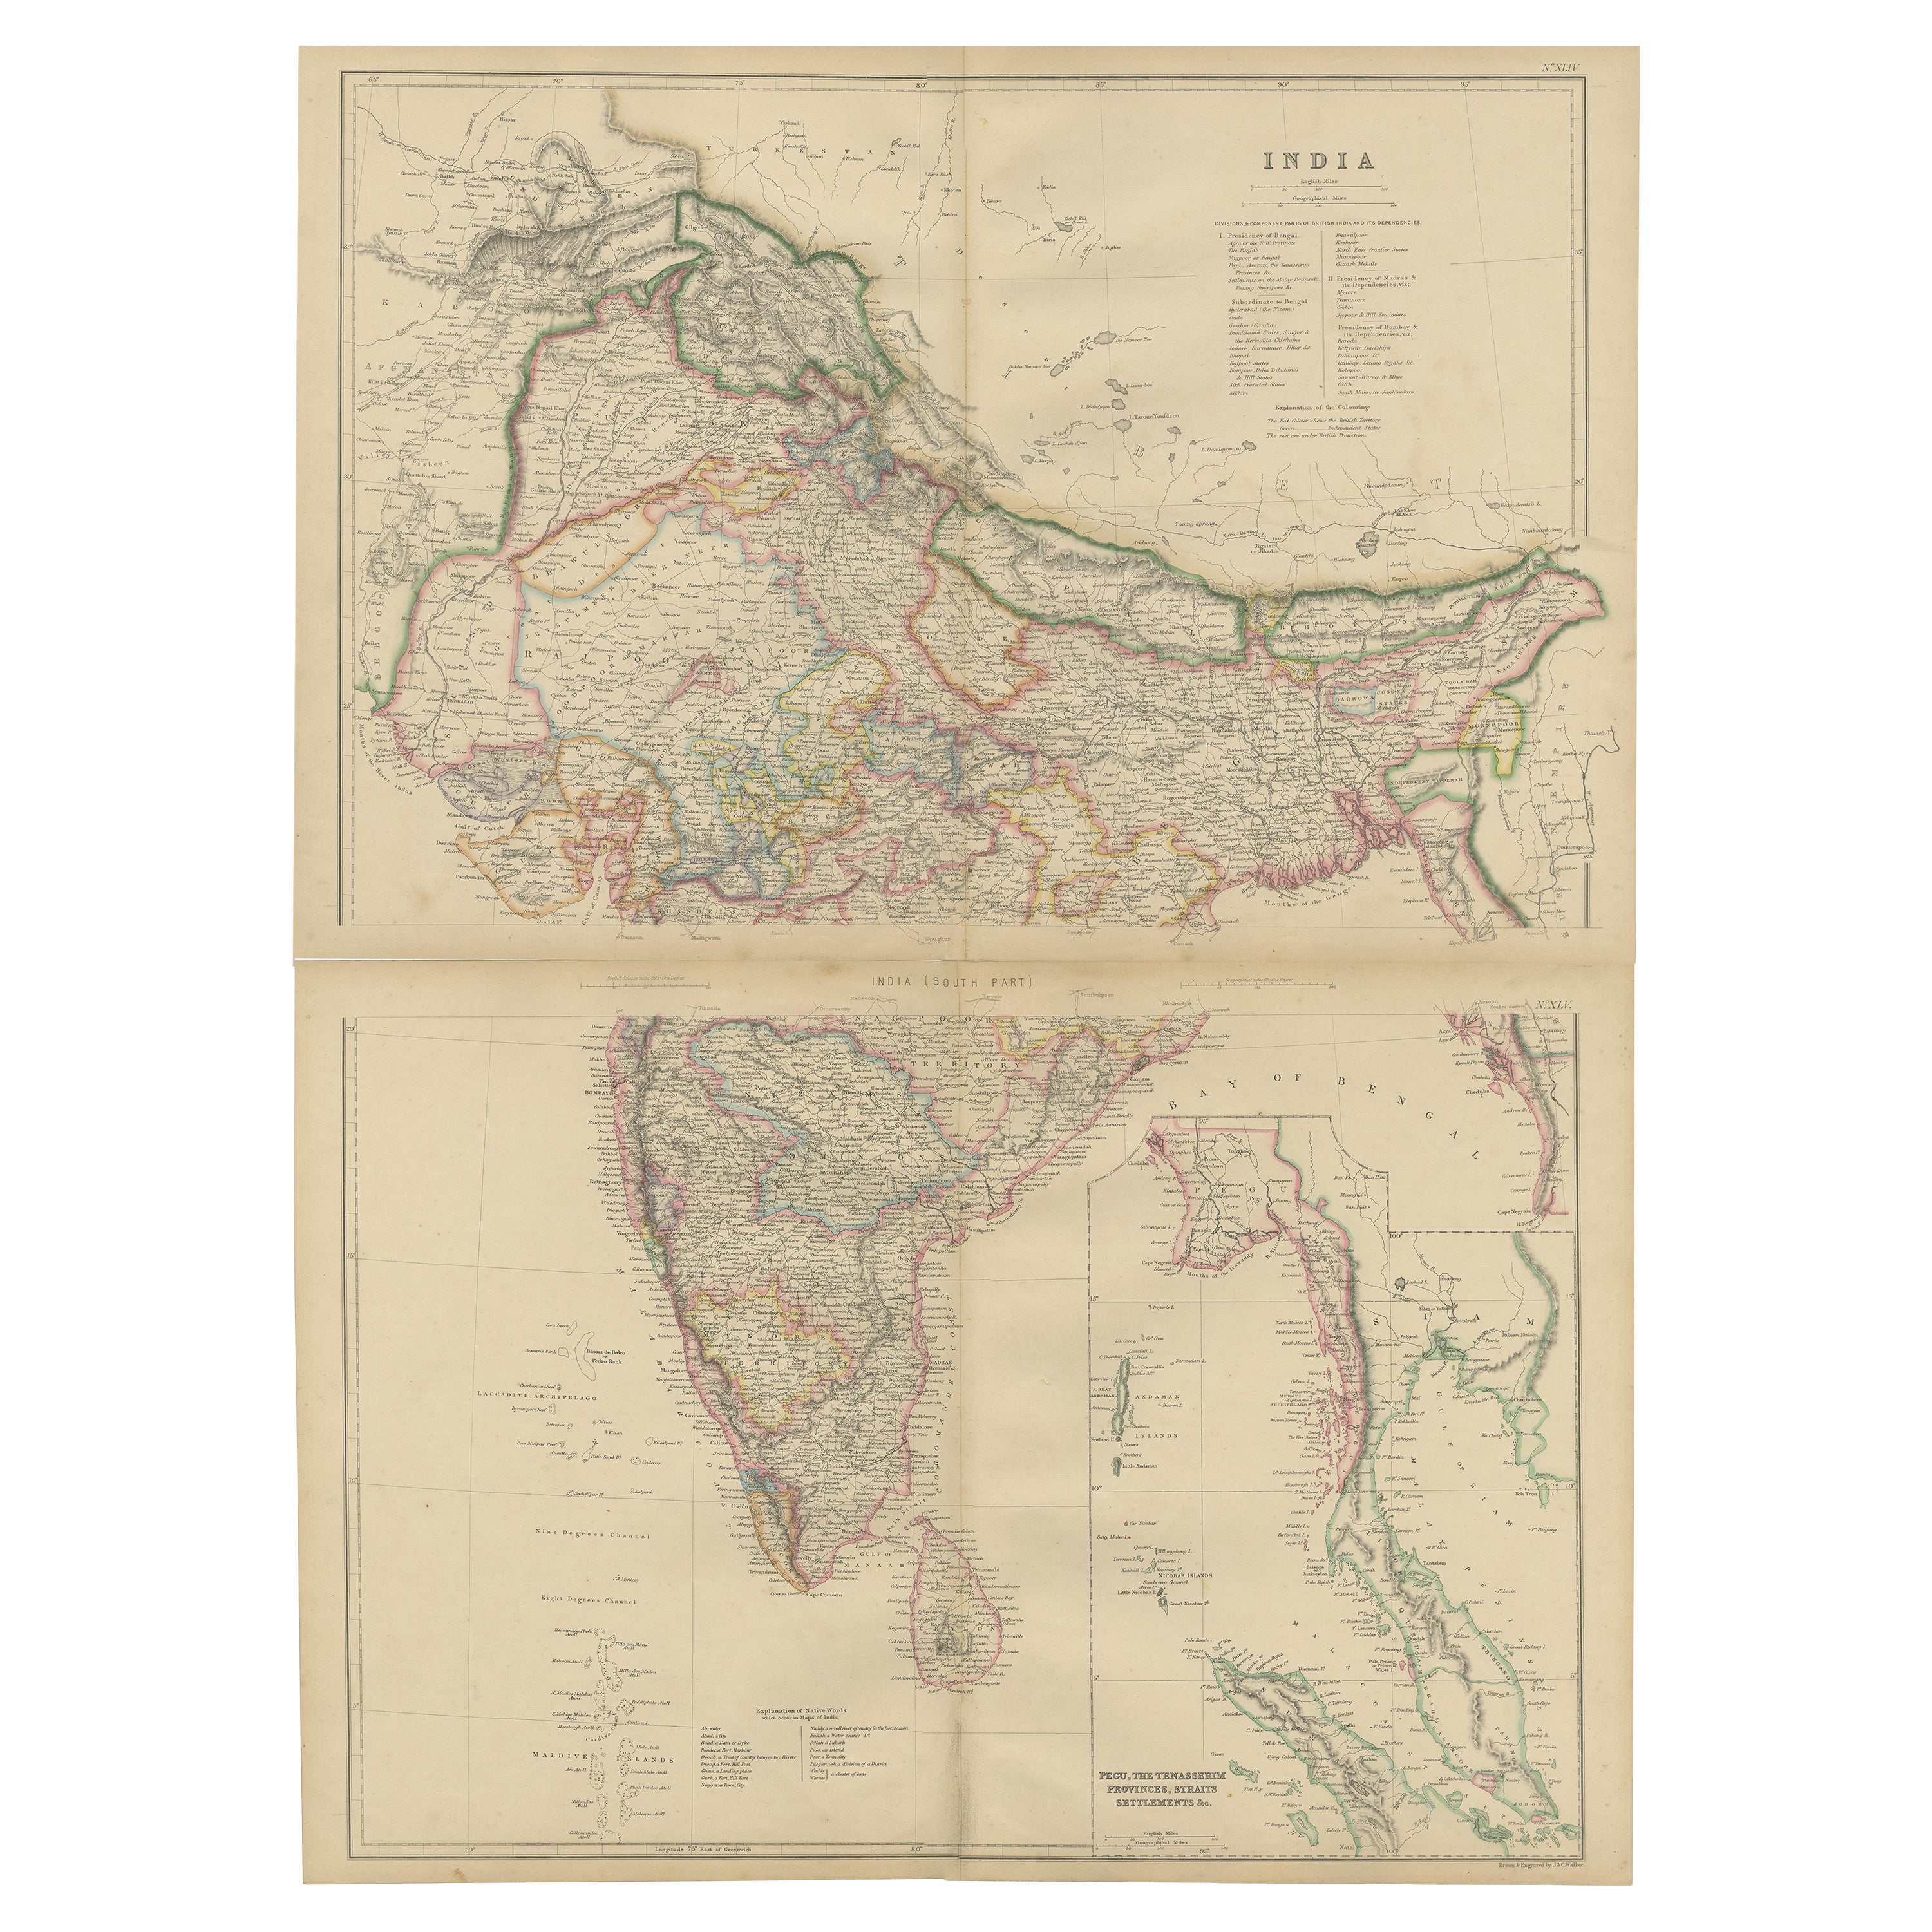 Vintage Cartographic Collection Set of India Explored - W. G. Blackie's 1859 